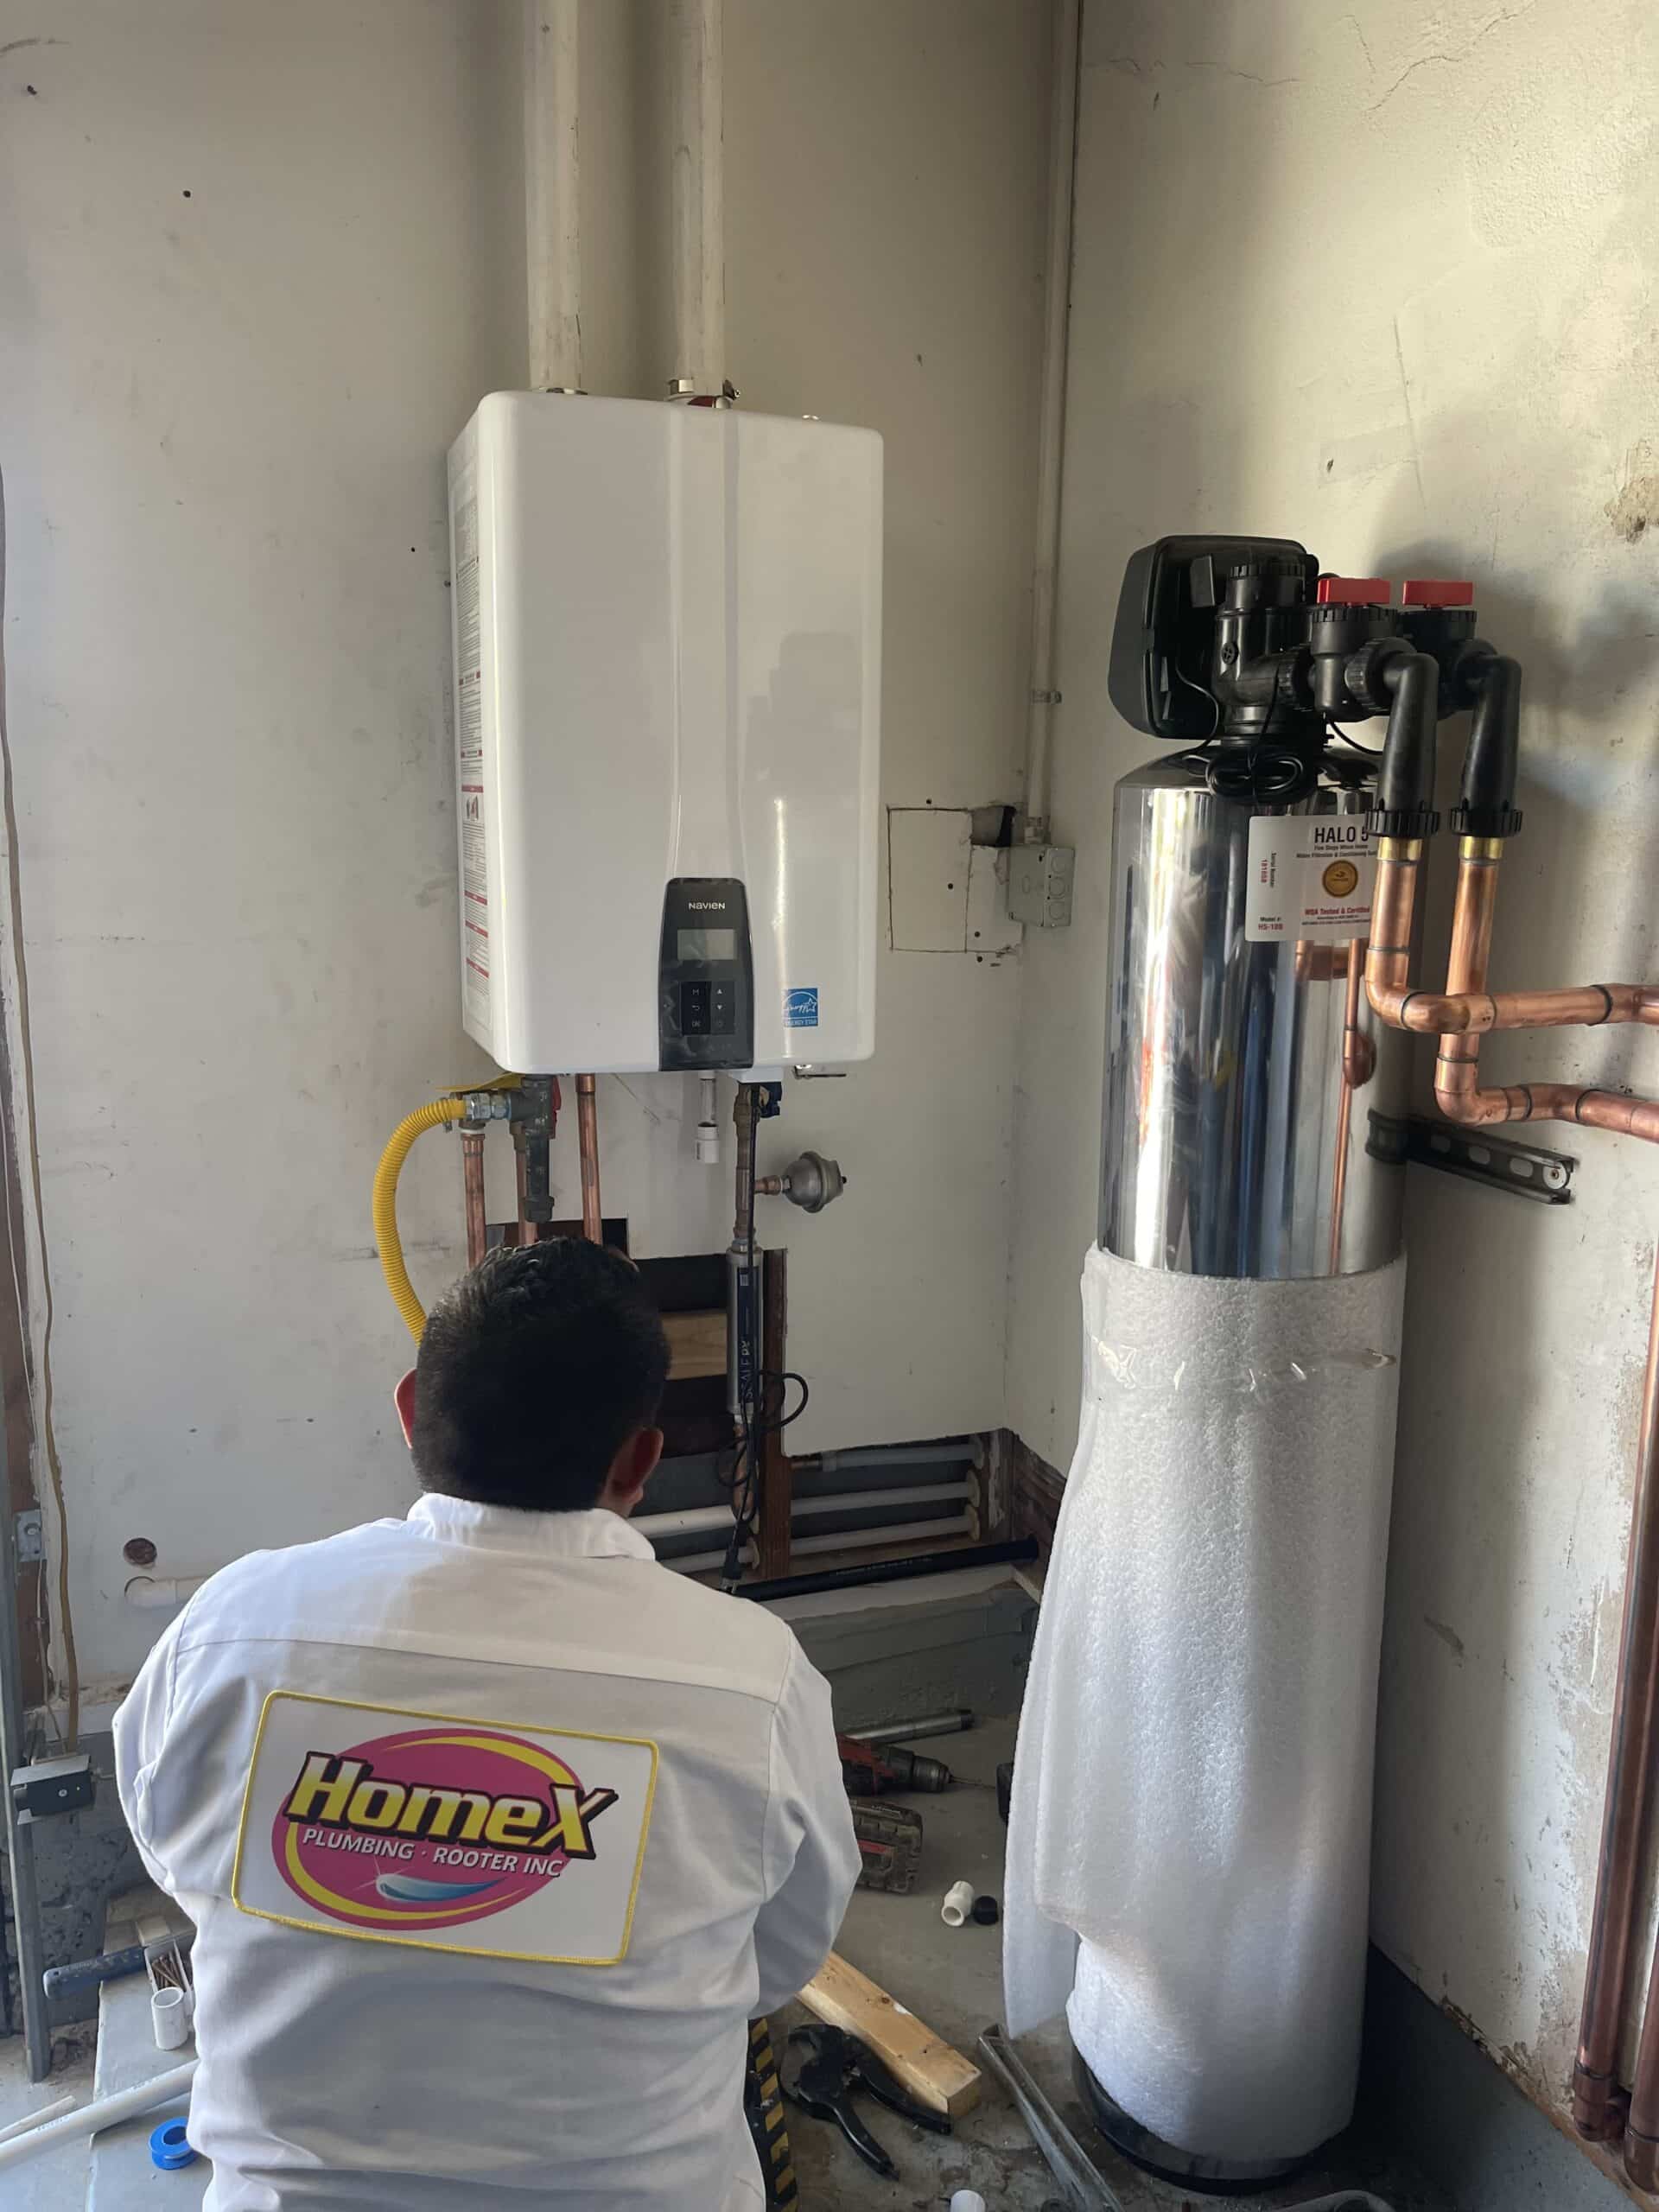 HomeX plumber installing water heater expansion tank